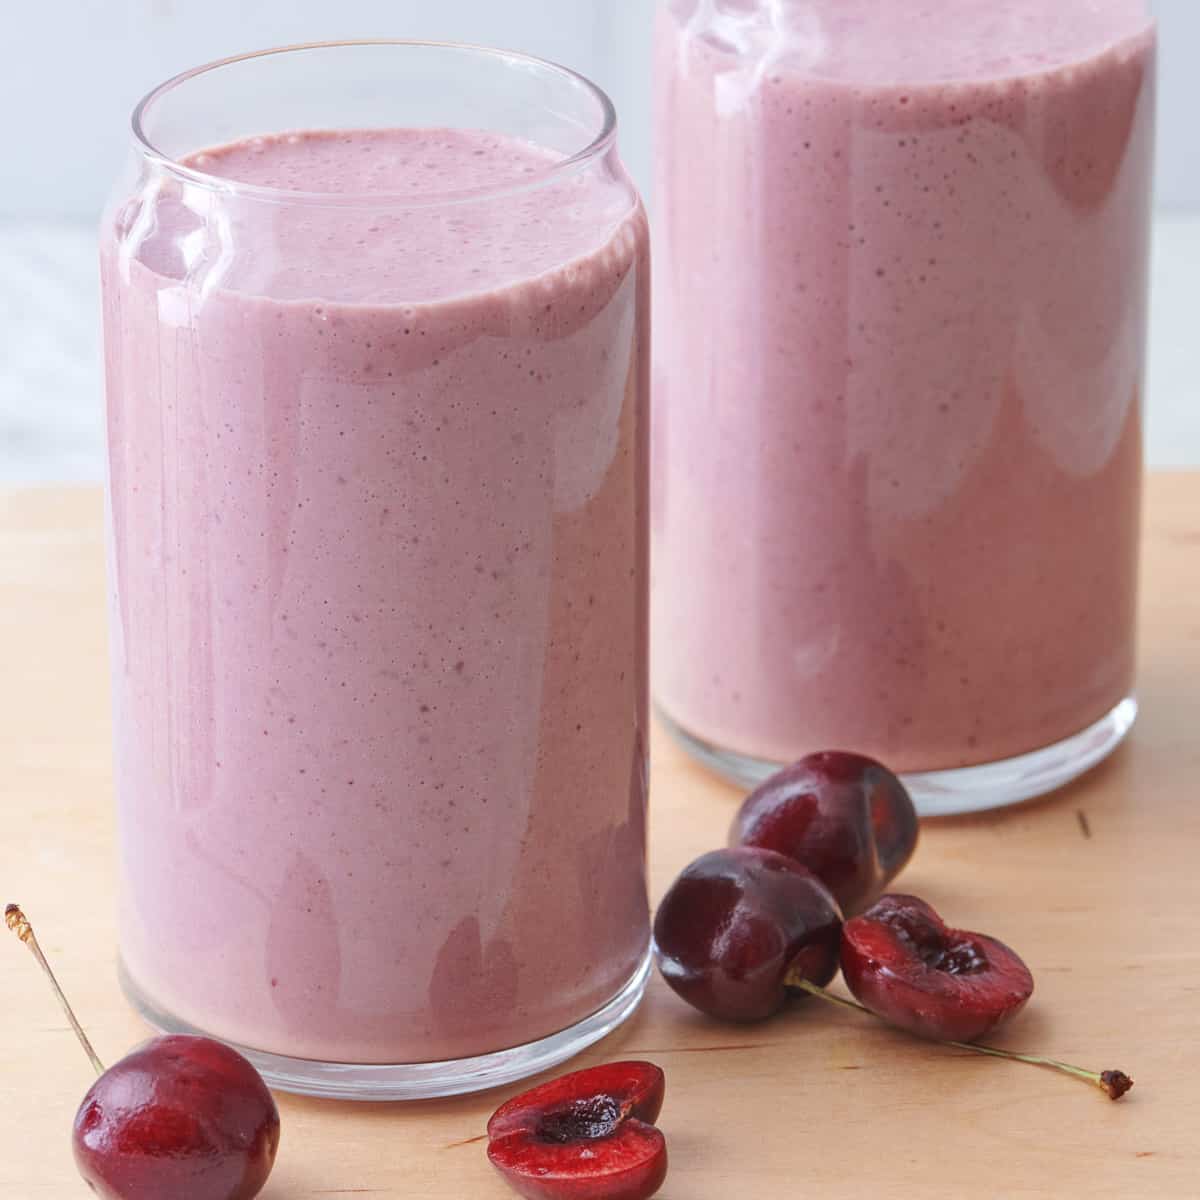 2 glasses of cherry smoothie with cherries surrounding them.